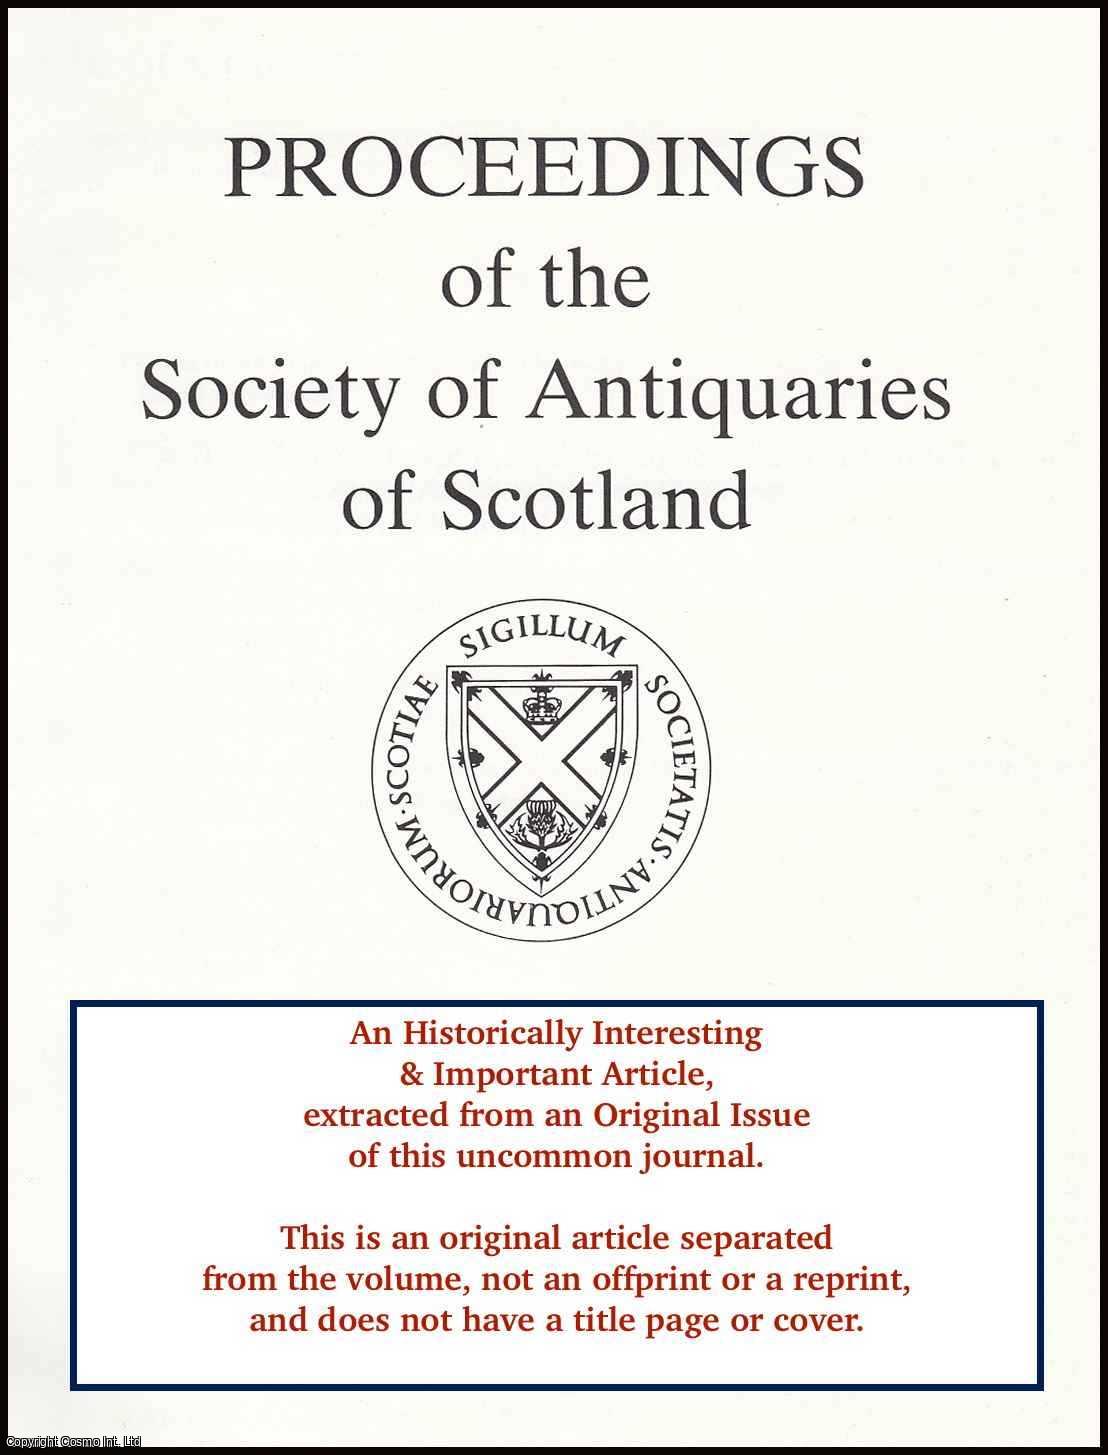 George C. Baxter - Some Unrecorded Relics in The Parishes of Cargill, Scone, and St. Martins. An original article from the Proceedings of the Society of Antiquaries of Scotland, 1891-92.